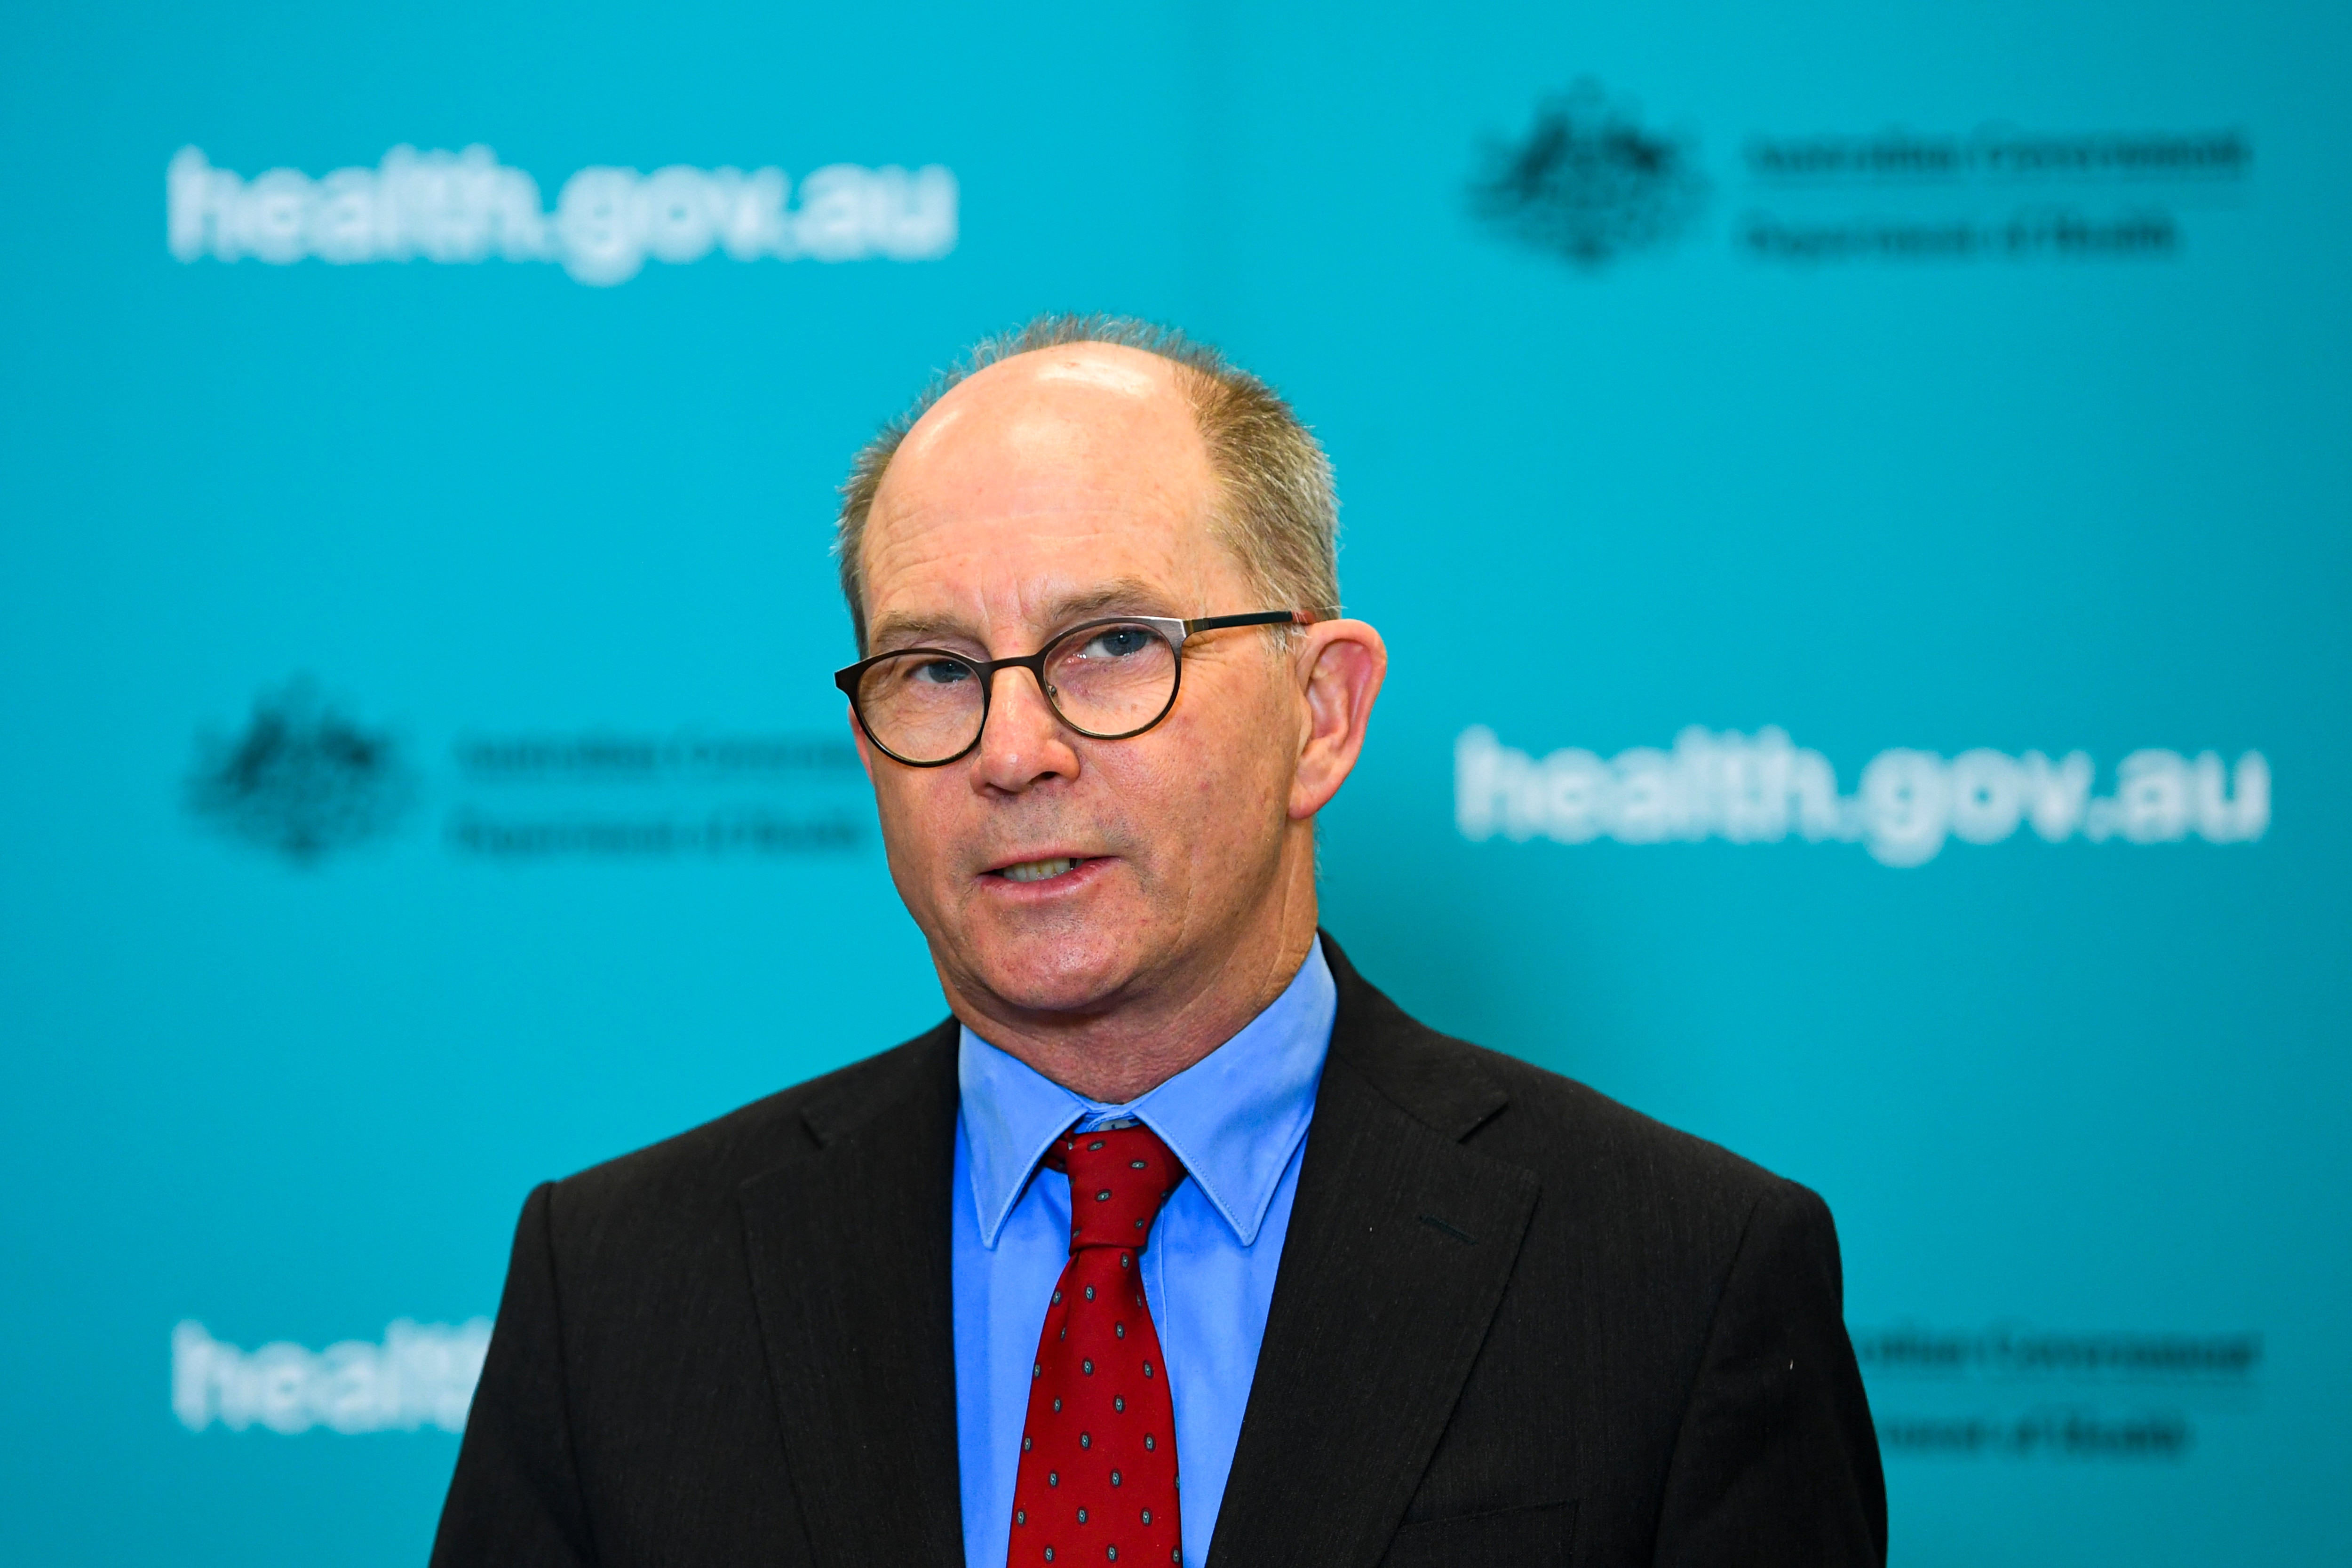 Australian Chief Medical Officer Paul Kelly addresses the media during a press conference in Canberra on 13 January, 2021.